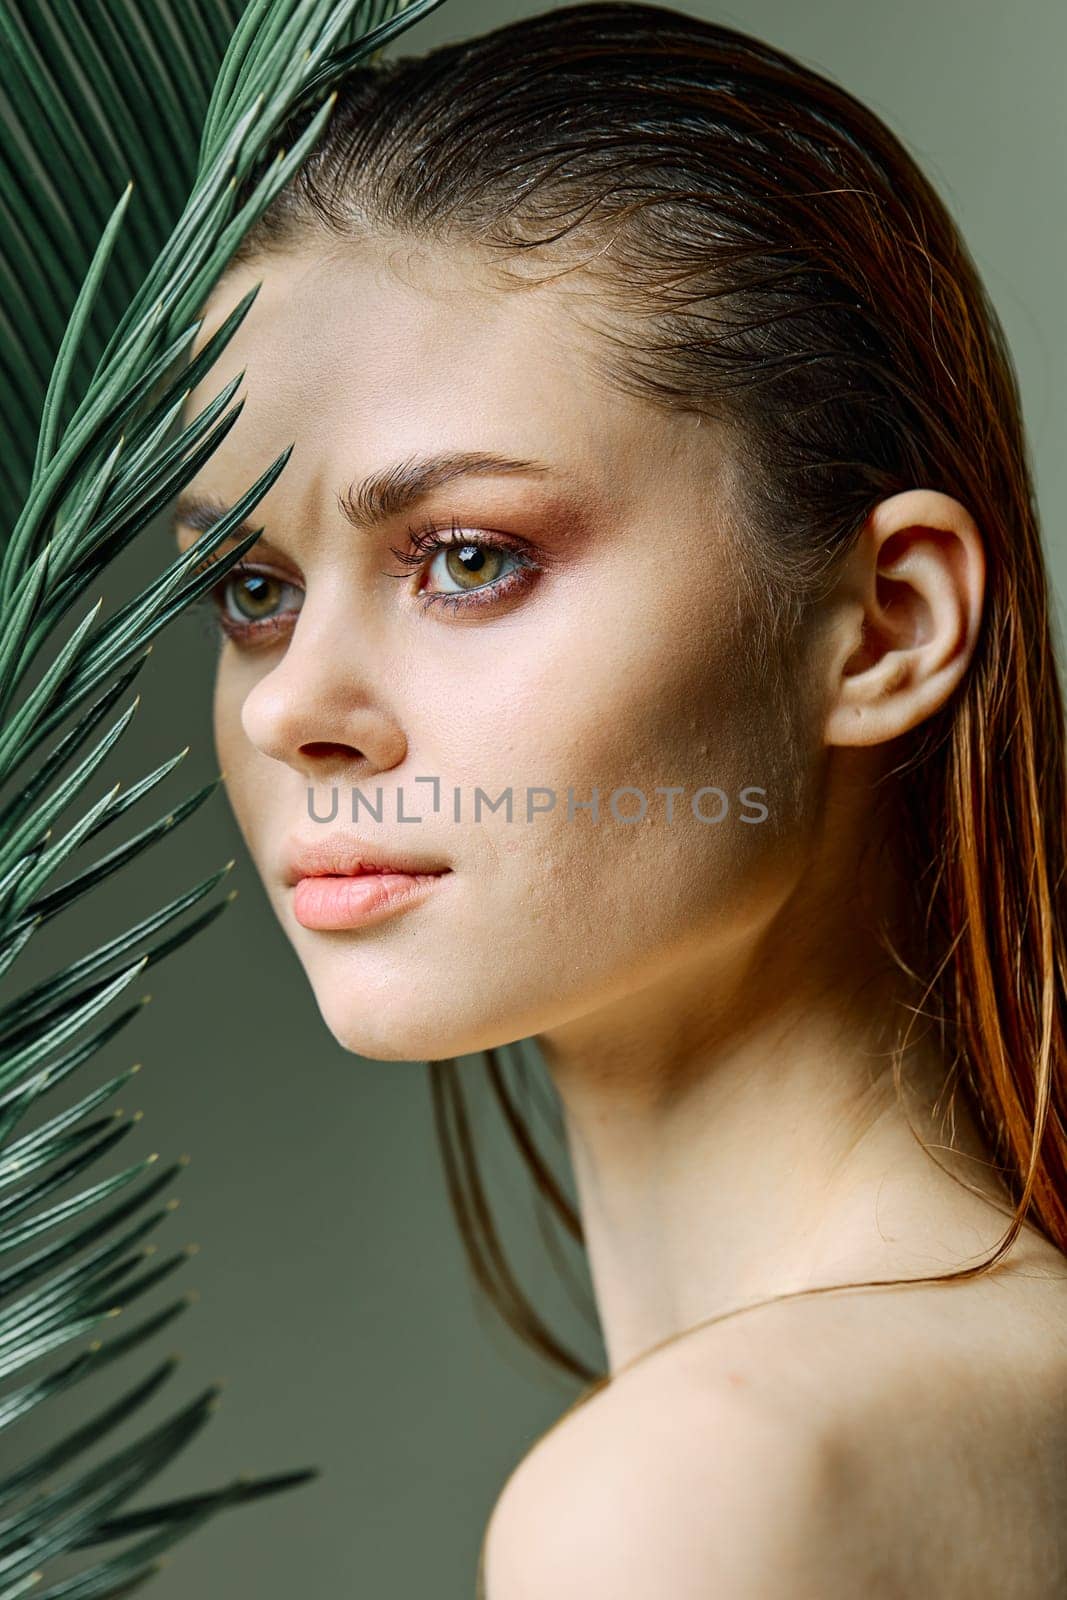 vertical photo, portrait of an elegant woman with slicked back hair, standing with a palm leaf holding it near her face. Photo without retouching by Vichizh